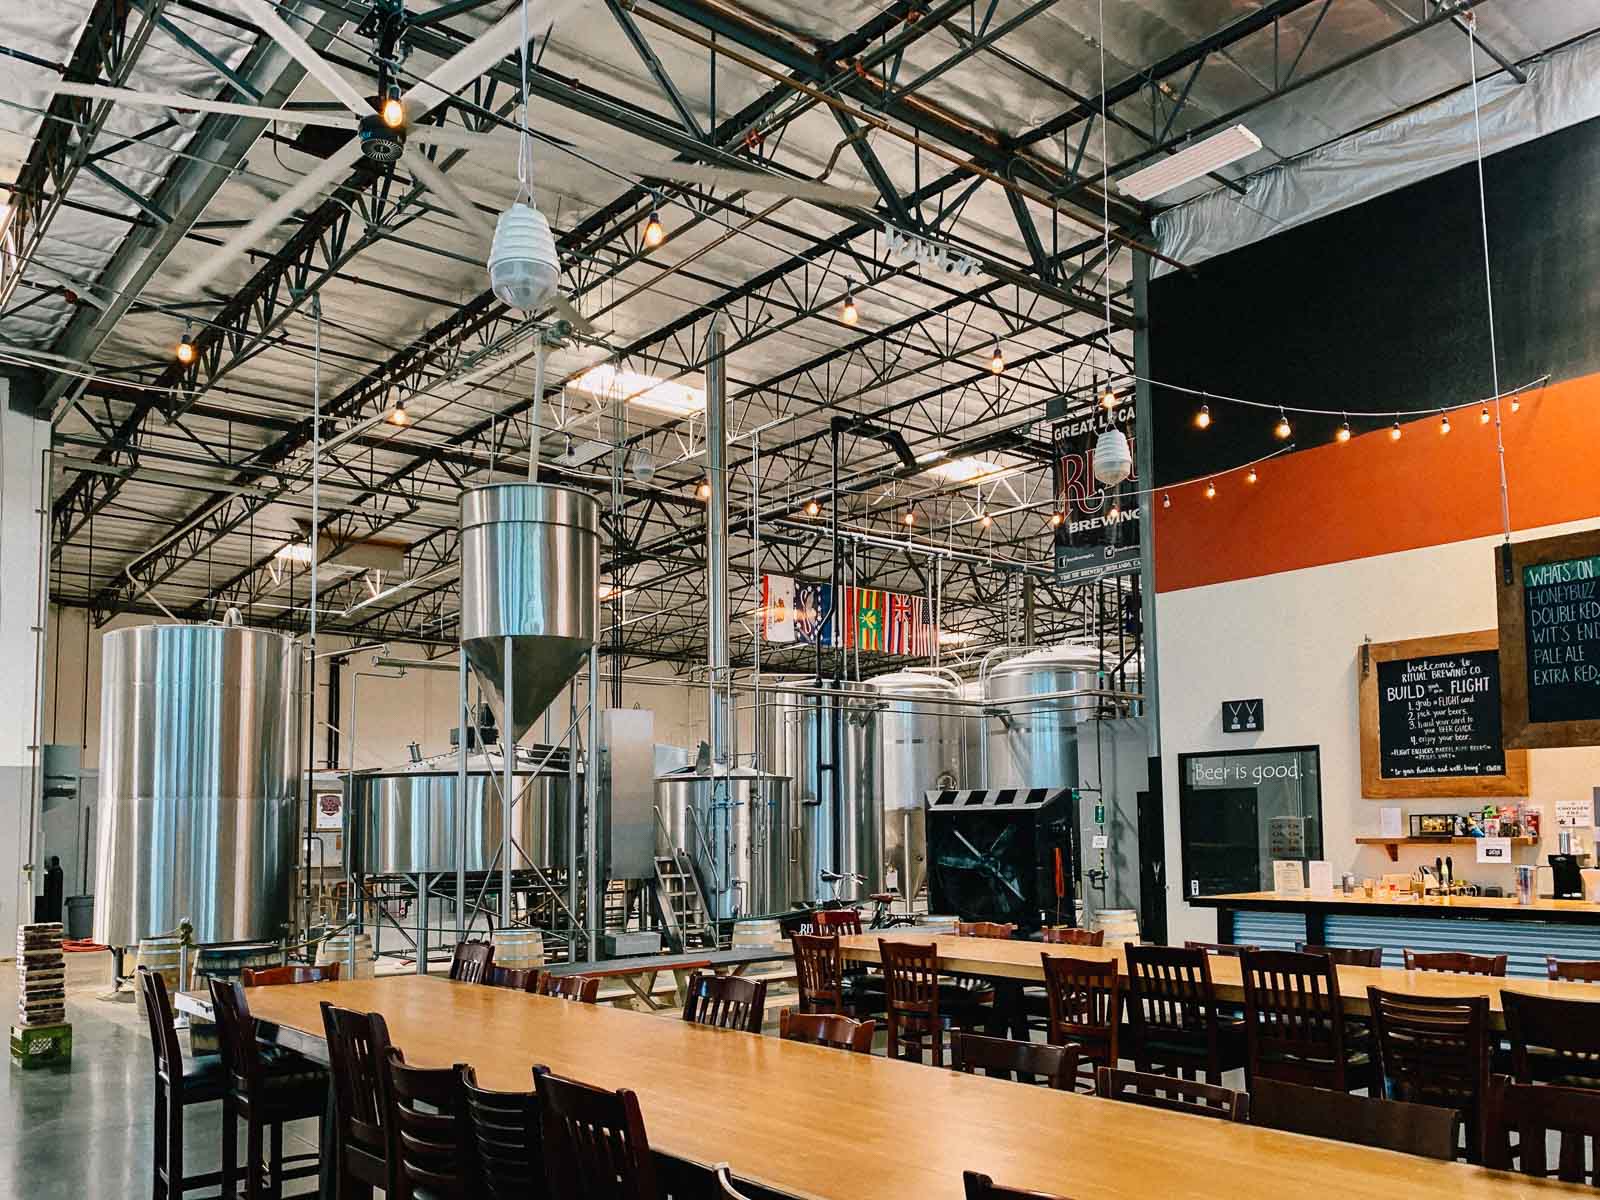 Pictured: Ritual Brewing Company's brewery and tasting room.